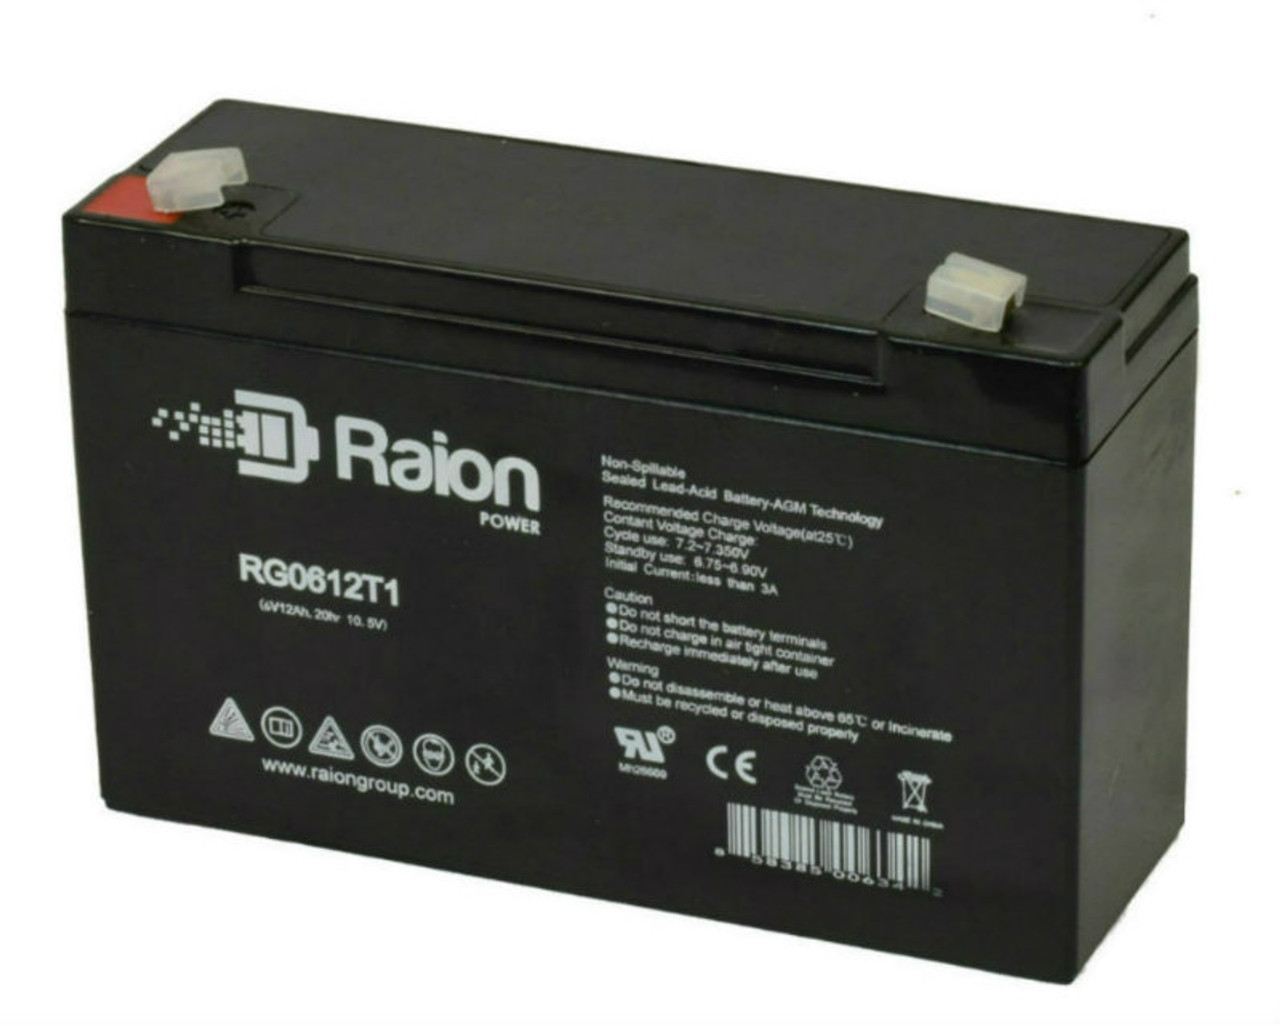 Raion Power RG06120T1 Replacement Battery for CCB Industrial 6MD-10